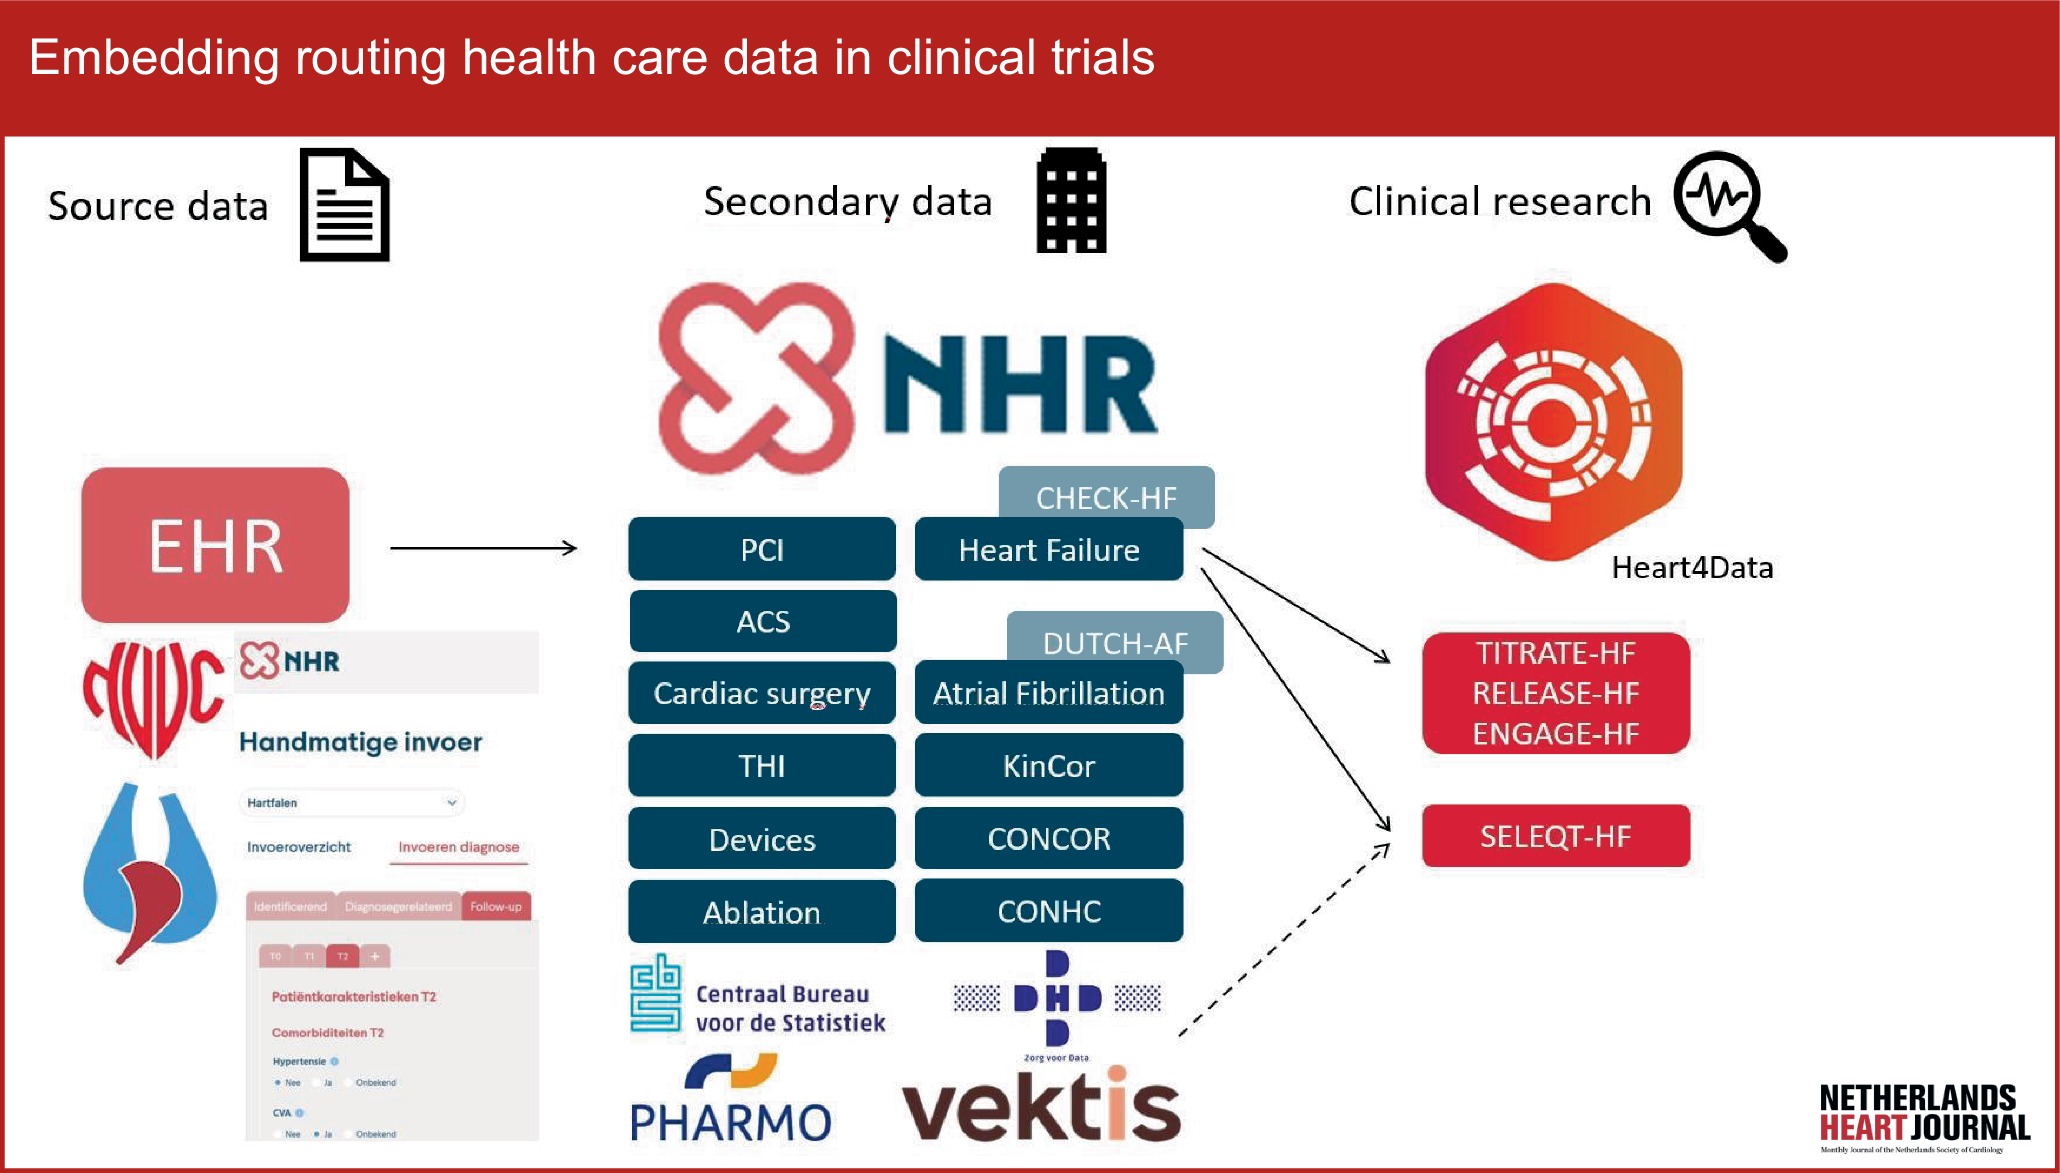 Embedding routine health care data in clinical trials: with great power comes great responsibility